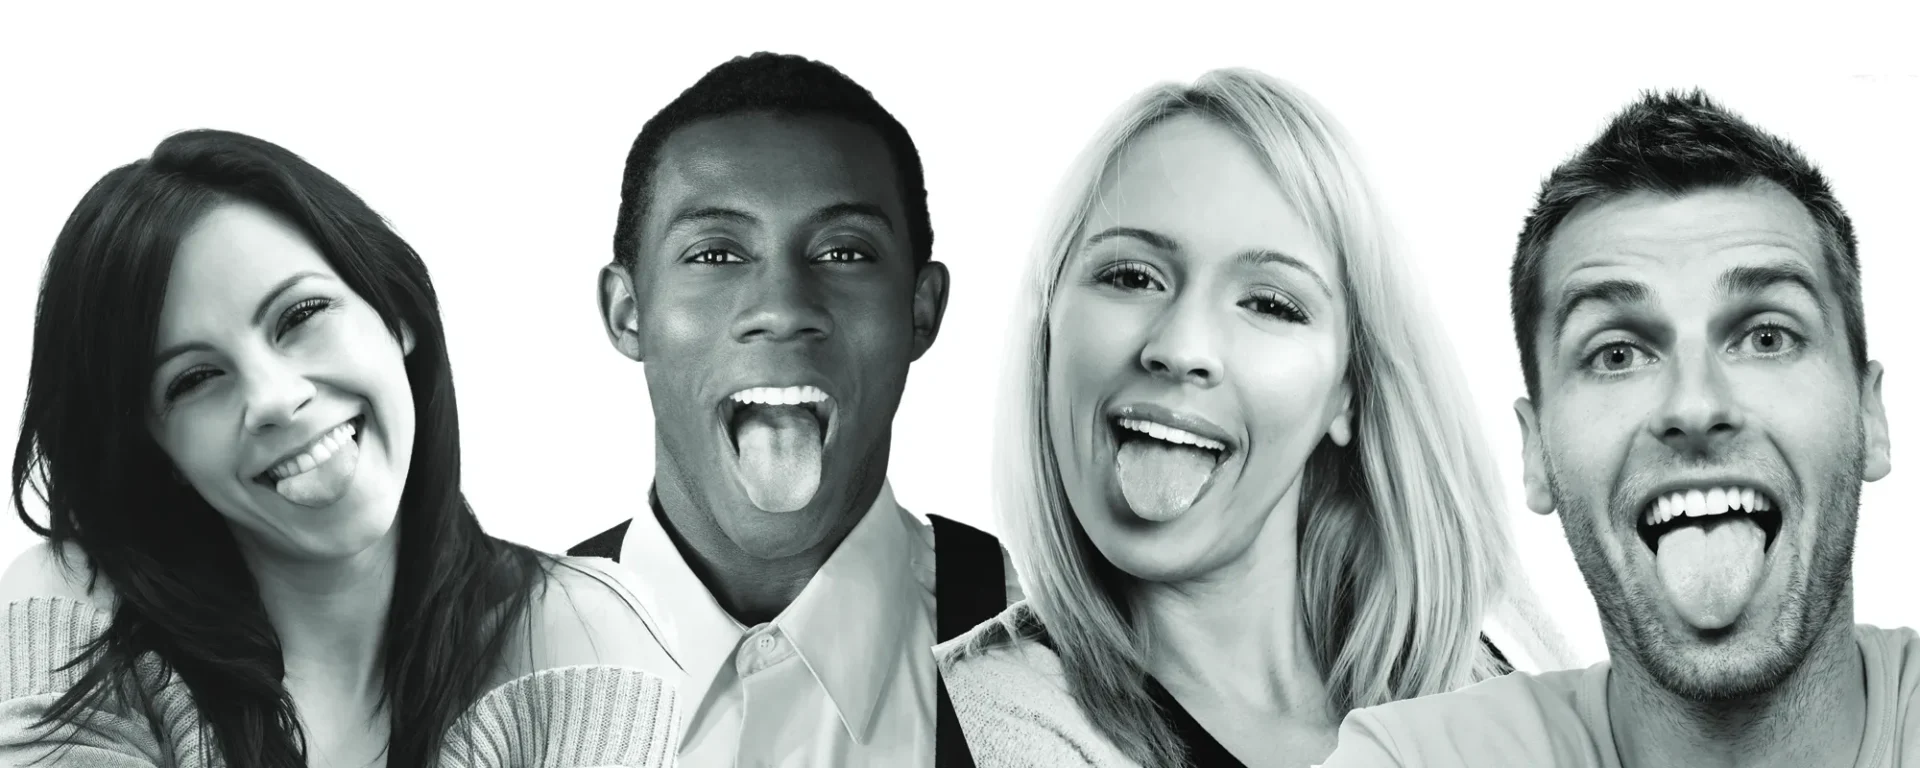 A man and woman sticking out their tongue.